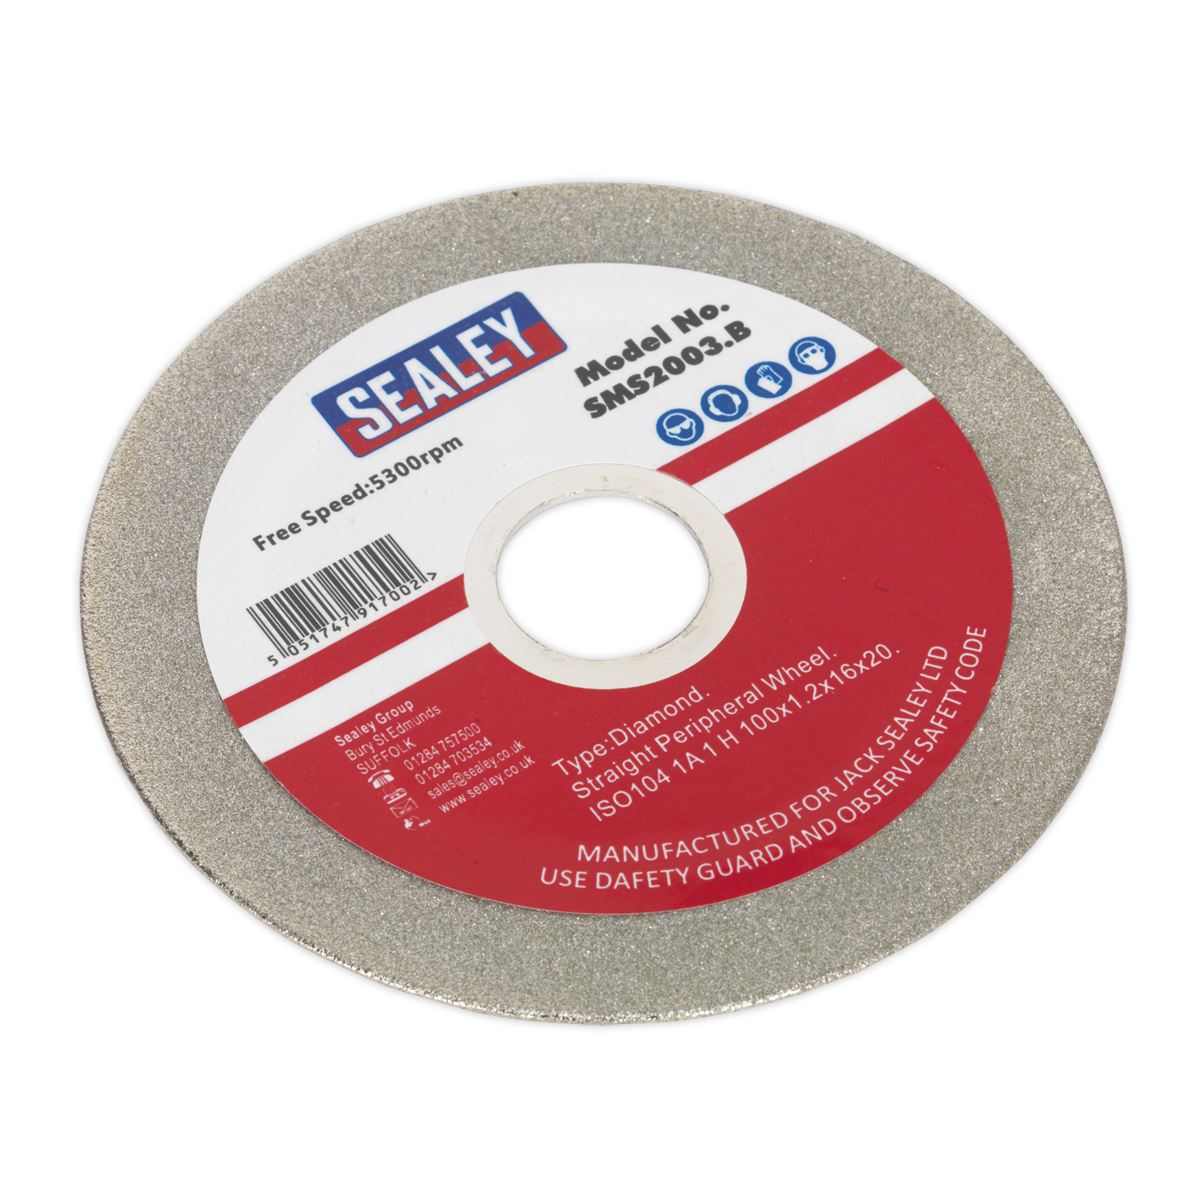 Sealey Grinding Disc Diamond Coated 100mm for SMS2003